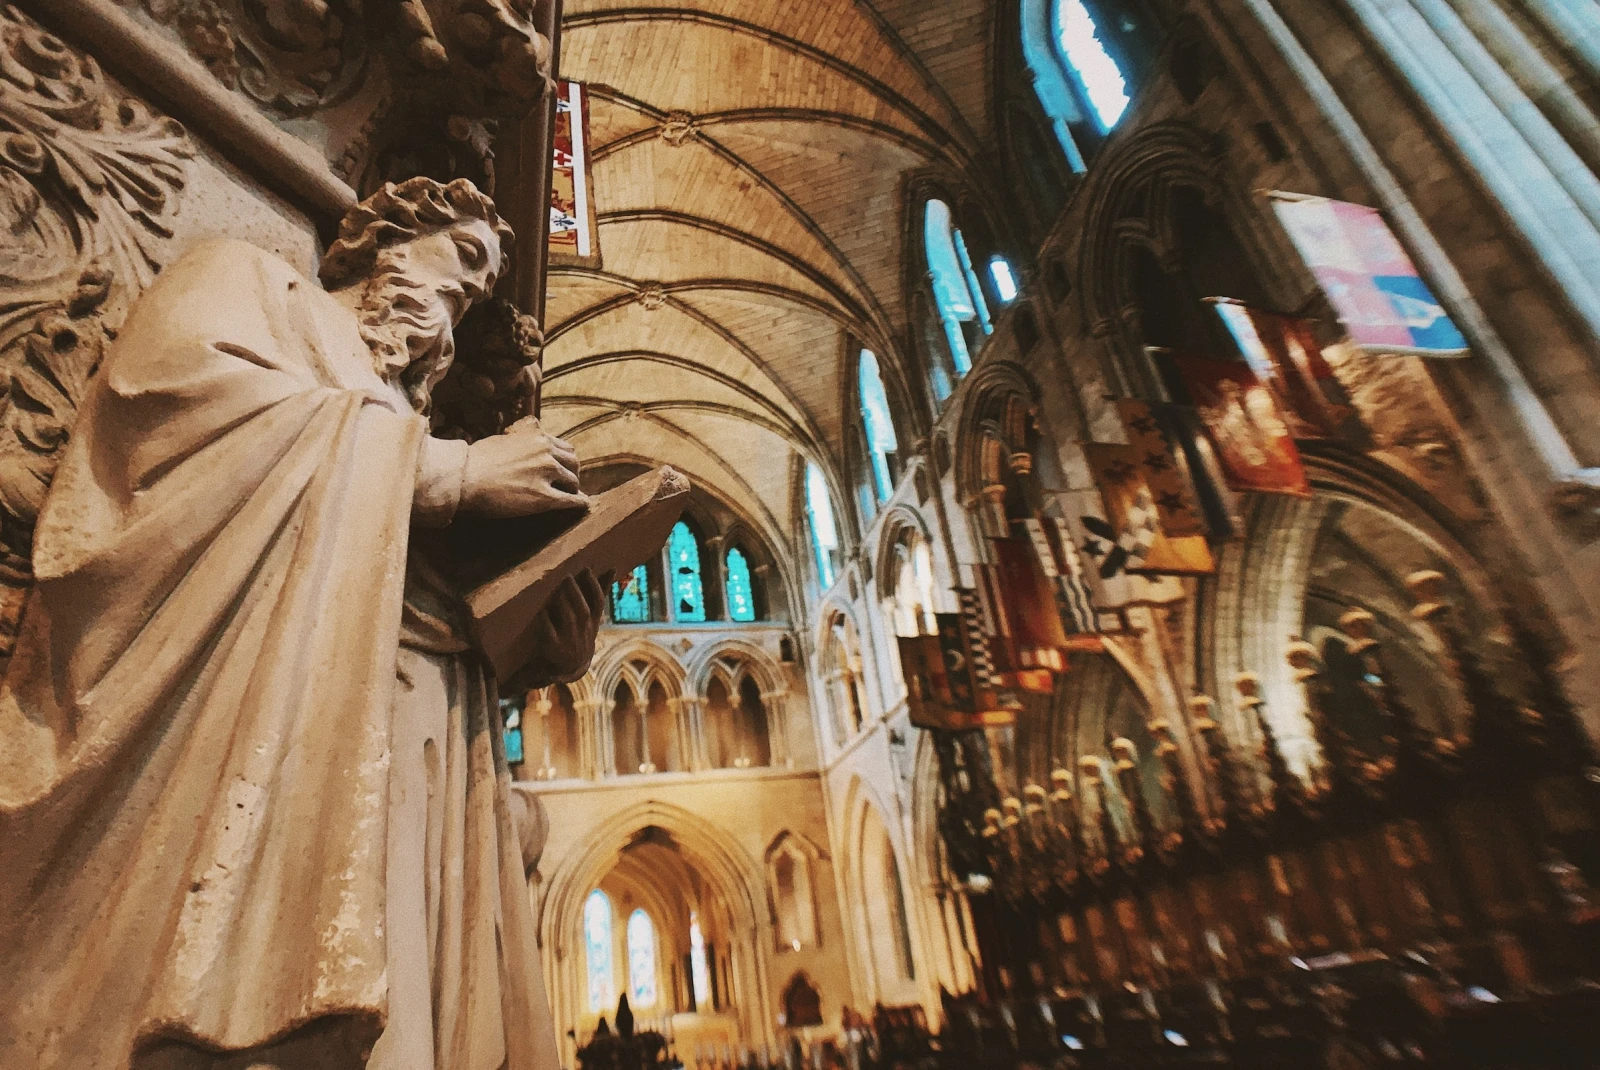 Saint Patrick's Cathedral in Ireland stands as a majestic testament to history and faith.